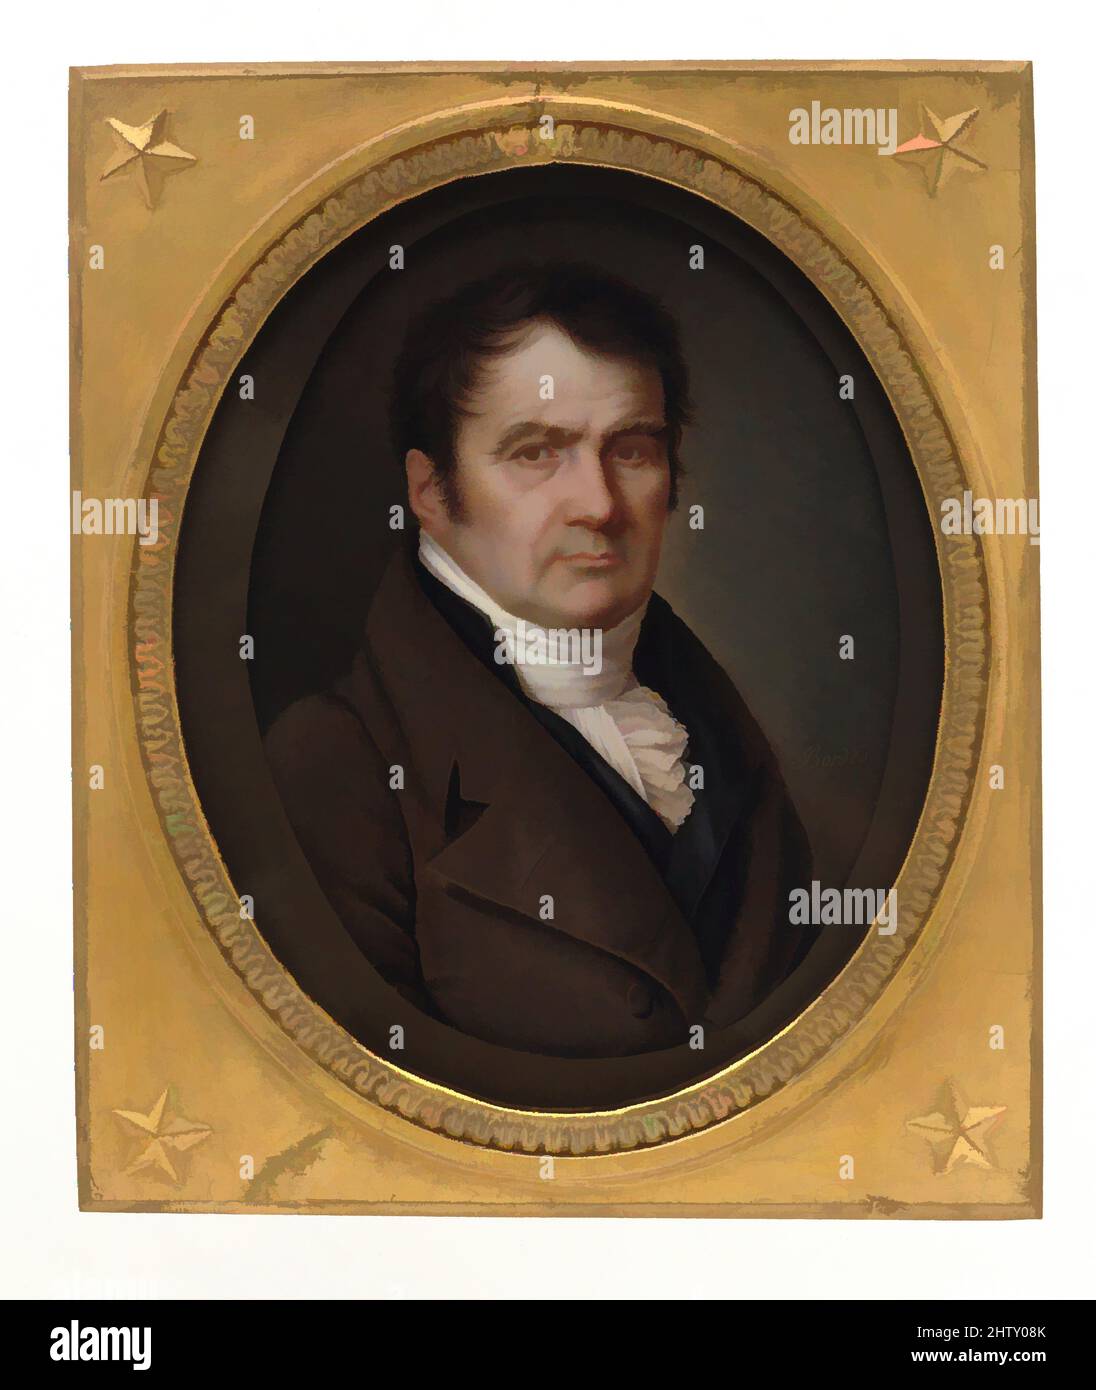 Art inspired by Portrait of a Man, ca. 1810, Ivory set into card, Oval, 7 1/8 x 5 7/8 in. (181 x 149 mm), Miniatures, Joseph Bordes (French, 1773–after 1835, Classic works modernized by Artotop with a splash of modernity. Shapes, color and value, eye-catching visual impact on art. Emotions through freedom of artworks in a contemporary way. A timeless message pursuing a wildly creative new direction. Artists turning to the digital medium and creating the Artotop NFT Stock Photo